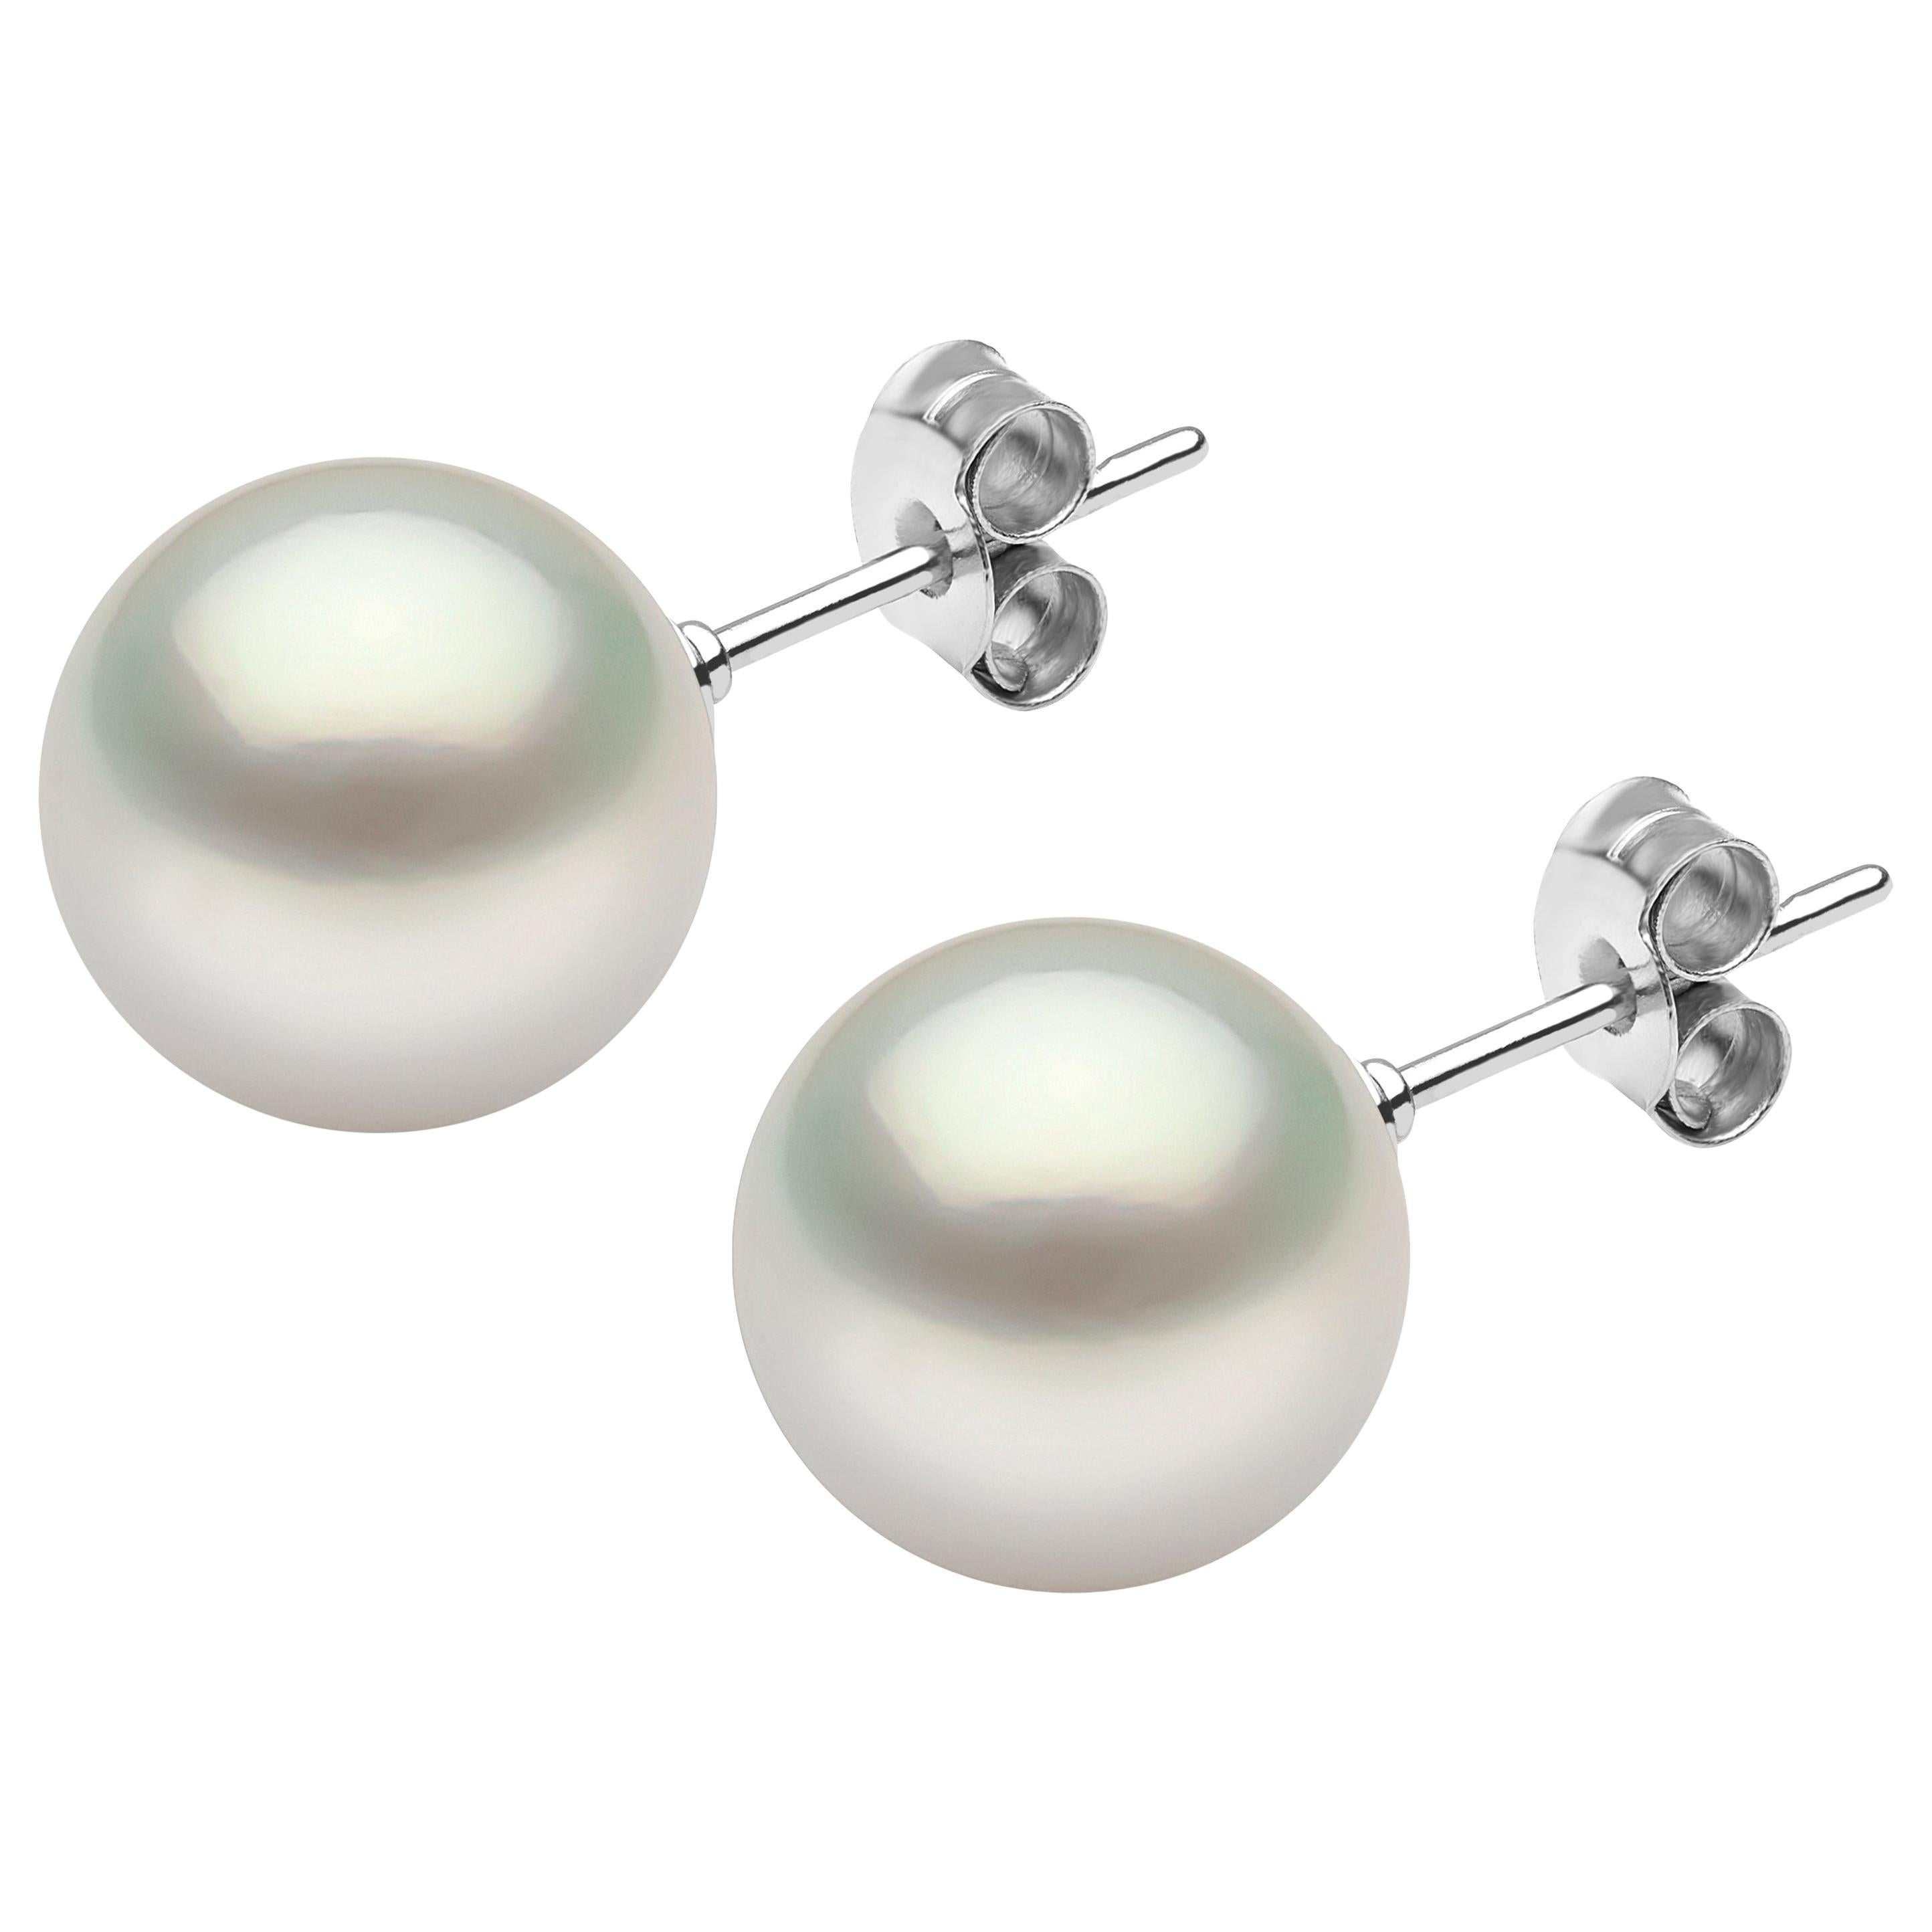 These timeless studs by Yoko London feature high-quality 11mm South Sea pearls on a classic 18K white gold post and scroll fitting. Each pearl is hand selected and matched by experts in our London atelier, meaning they are completed to the highest